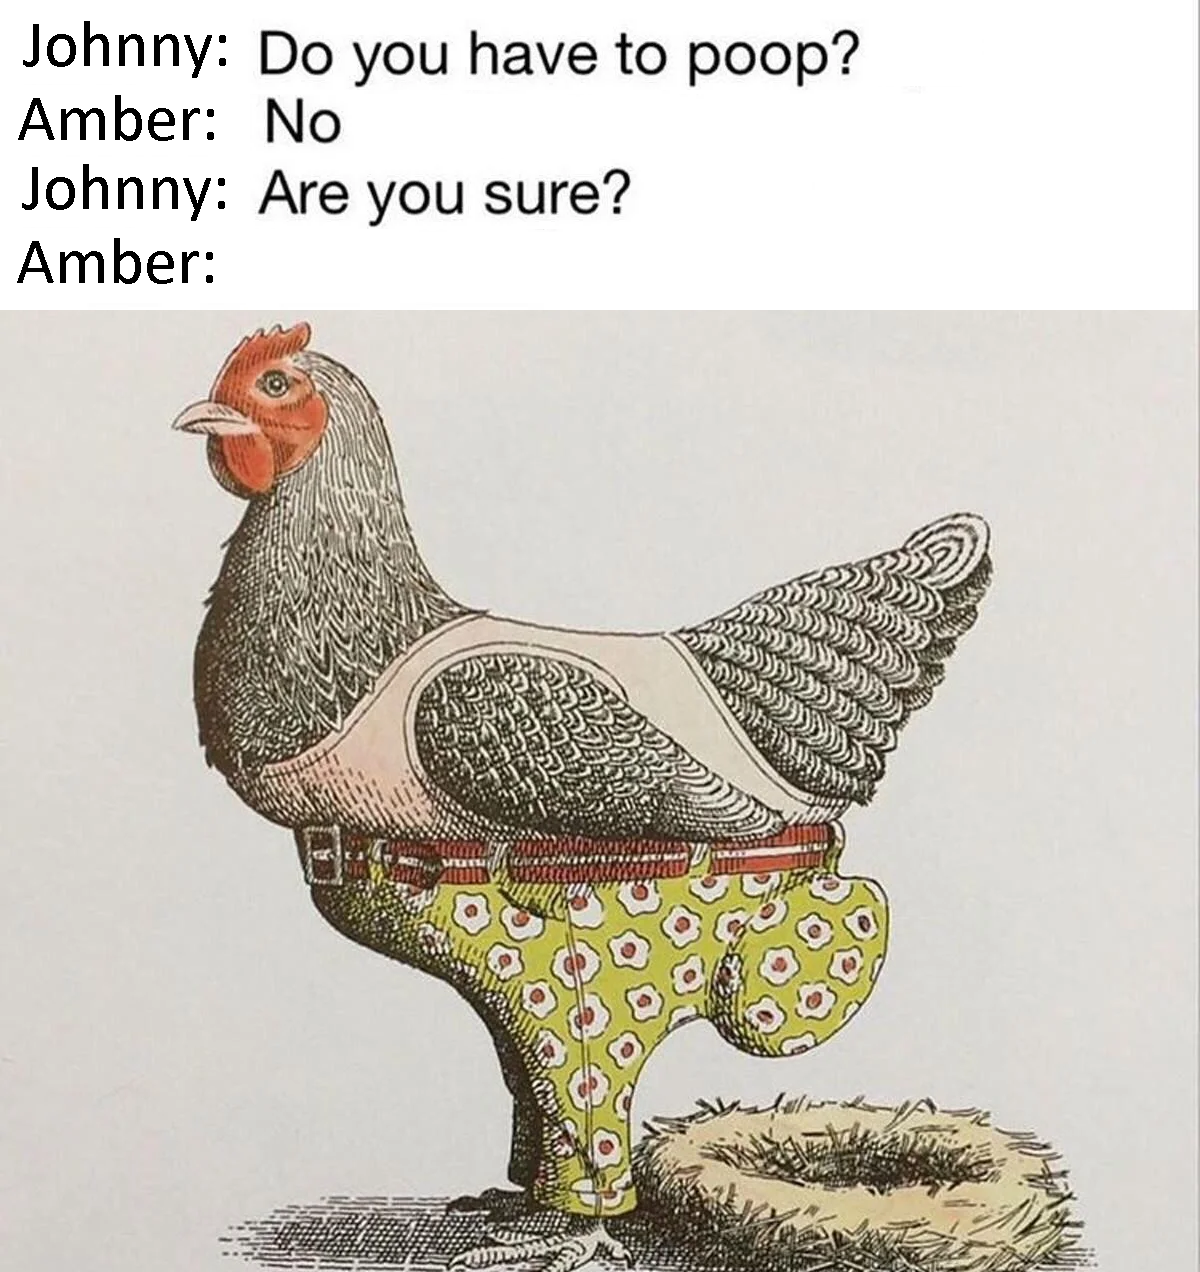 monday morning randomness - toddler poop meme - Johnny Do you have to poop? Amber No Johnny Are you sure? Amber Sodas